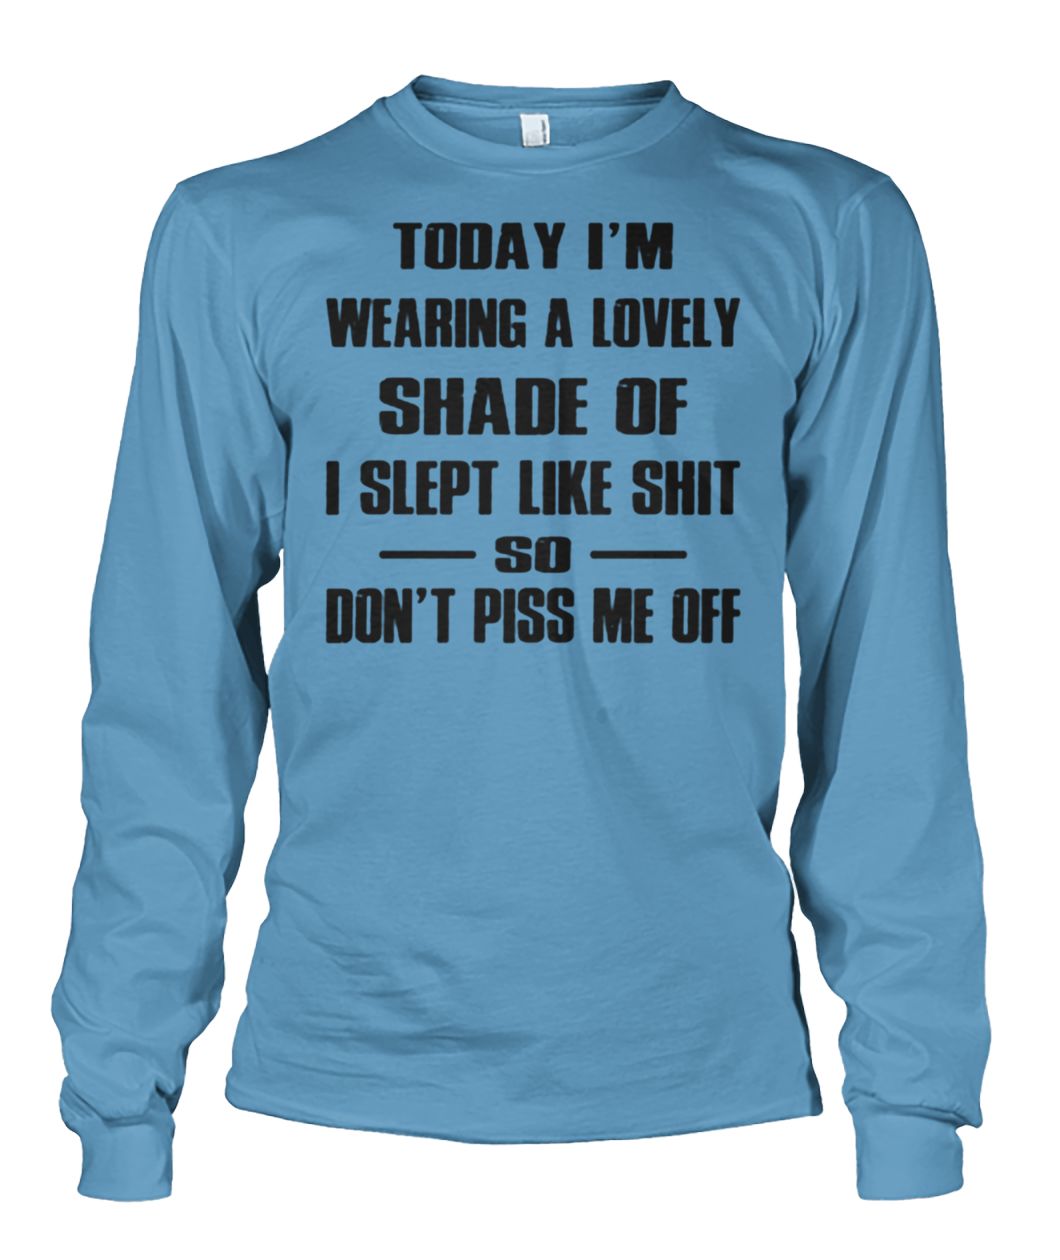 Today I'm wearing a lovely shade of I slept like shit so don't piss me off unisex long sleeve